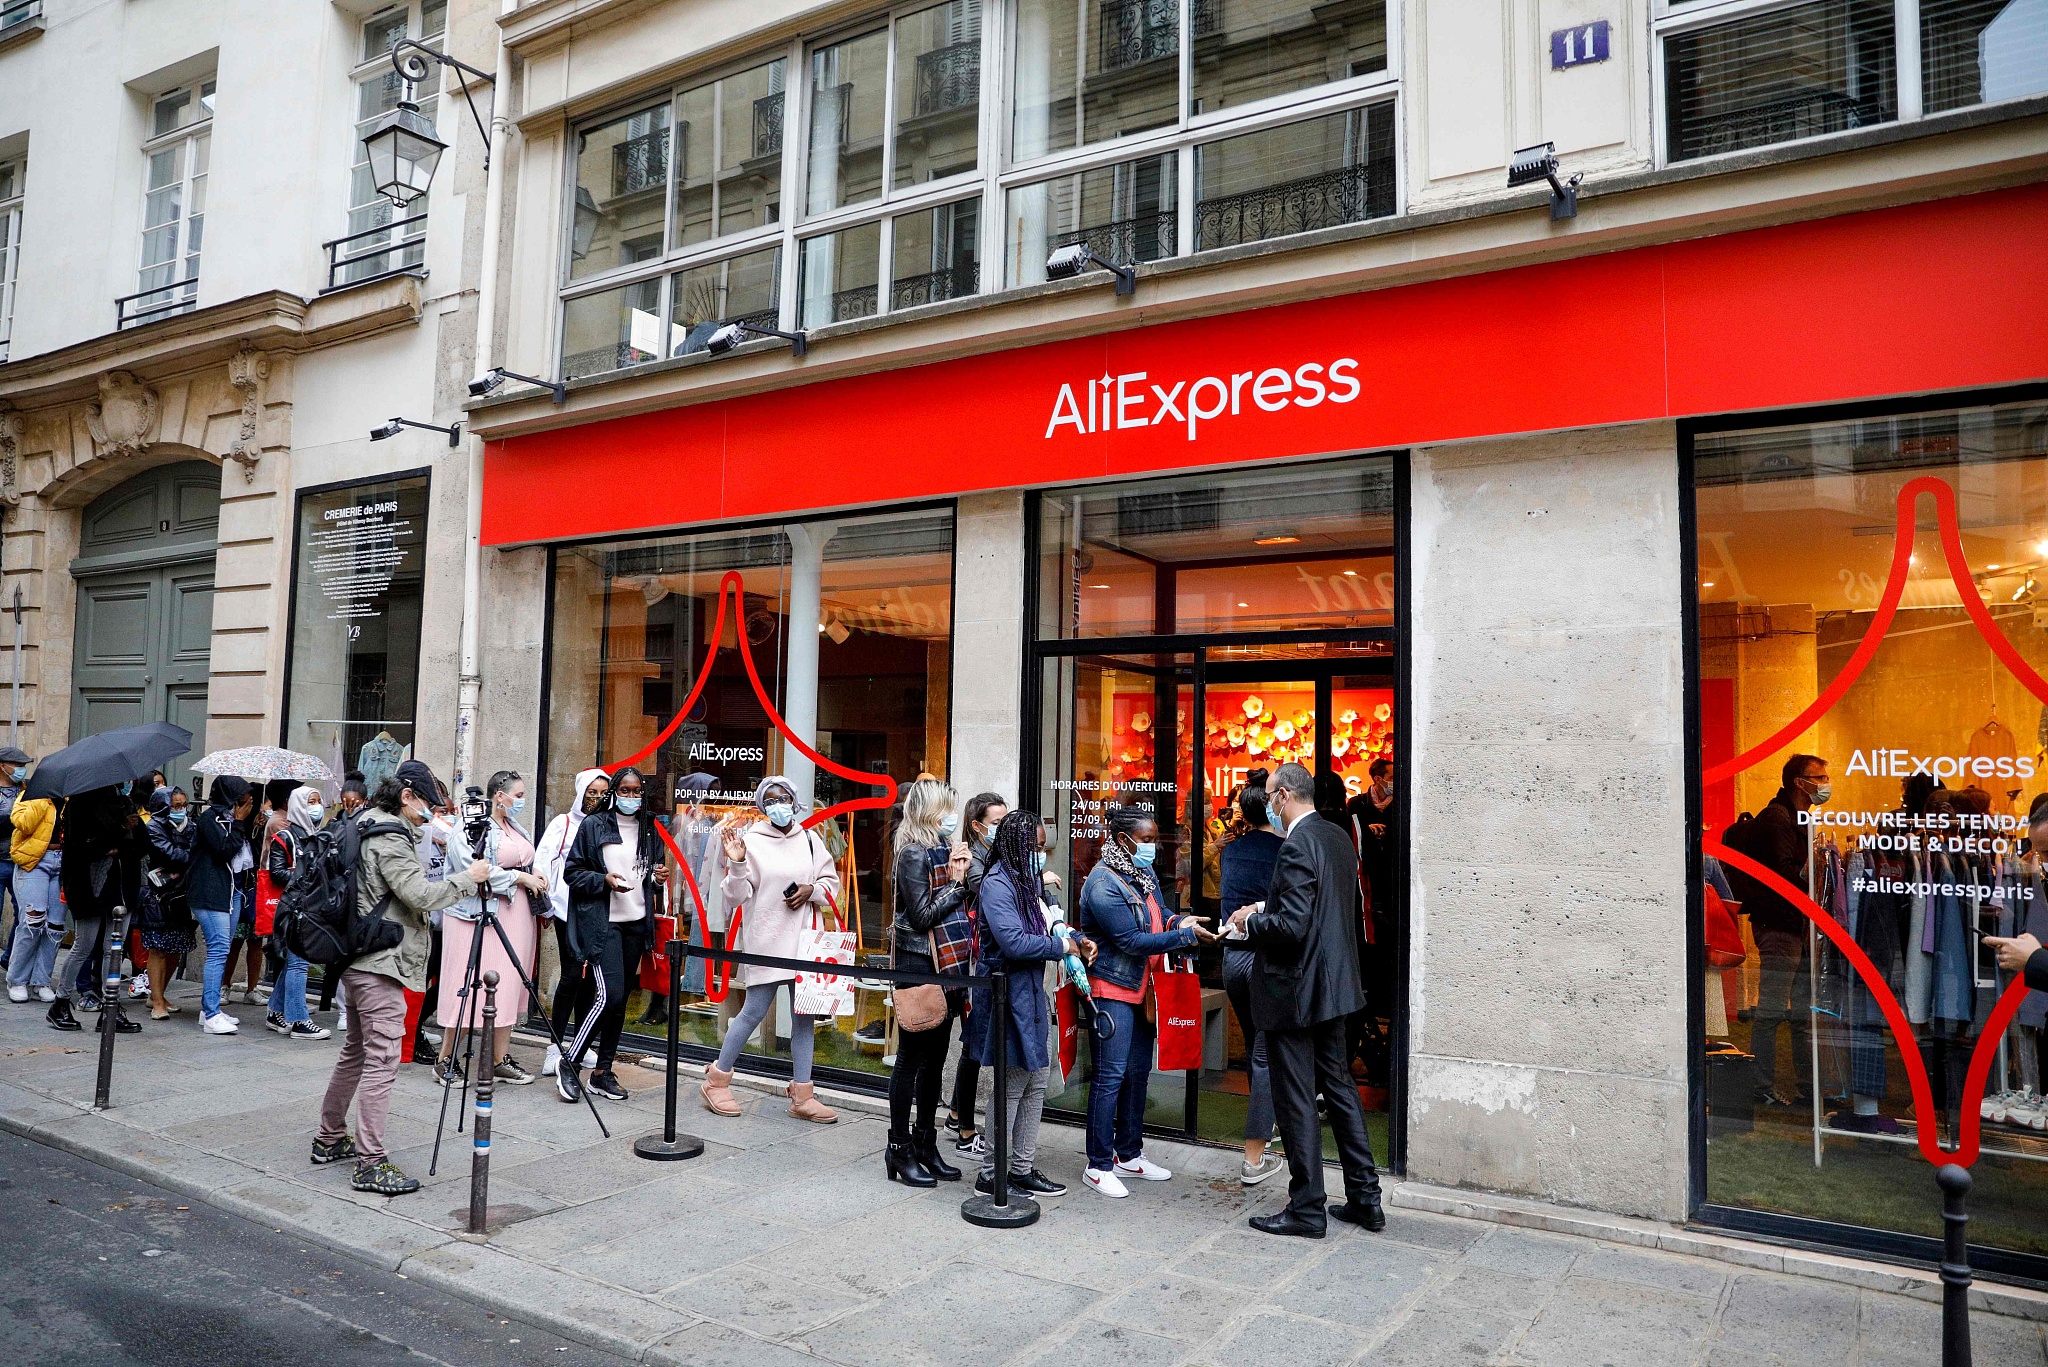 People waiting in line in front of an AliExpress pop-up store in Paris, France, September 24, 2020. /CFP